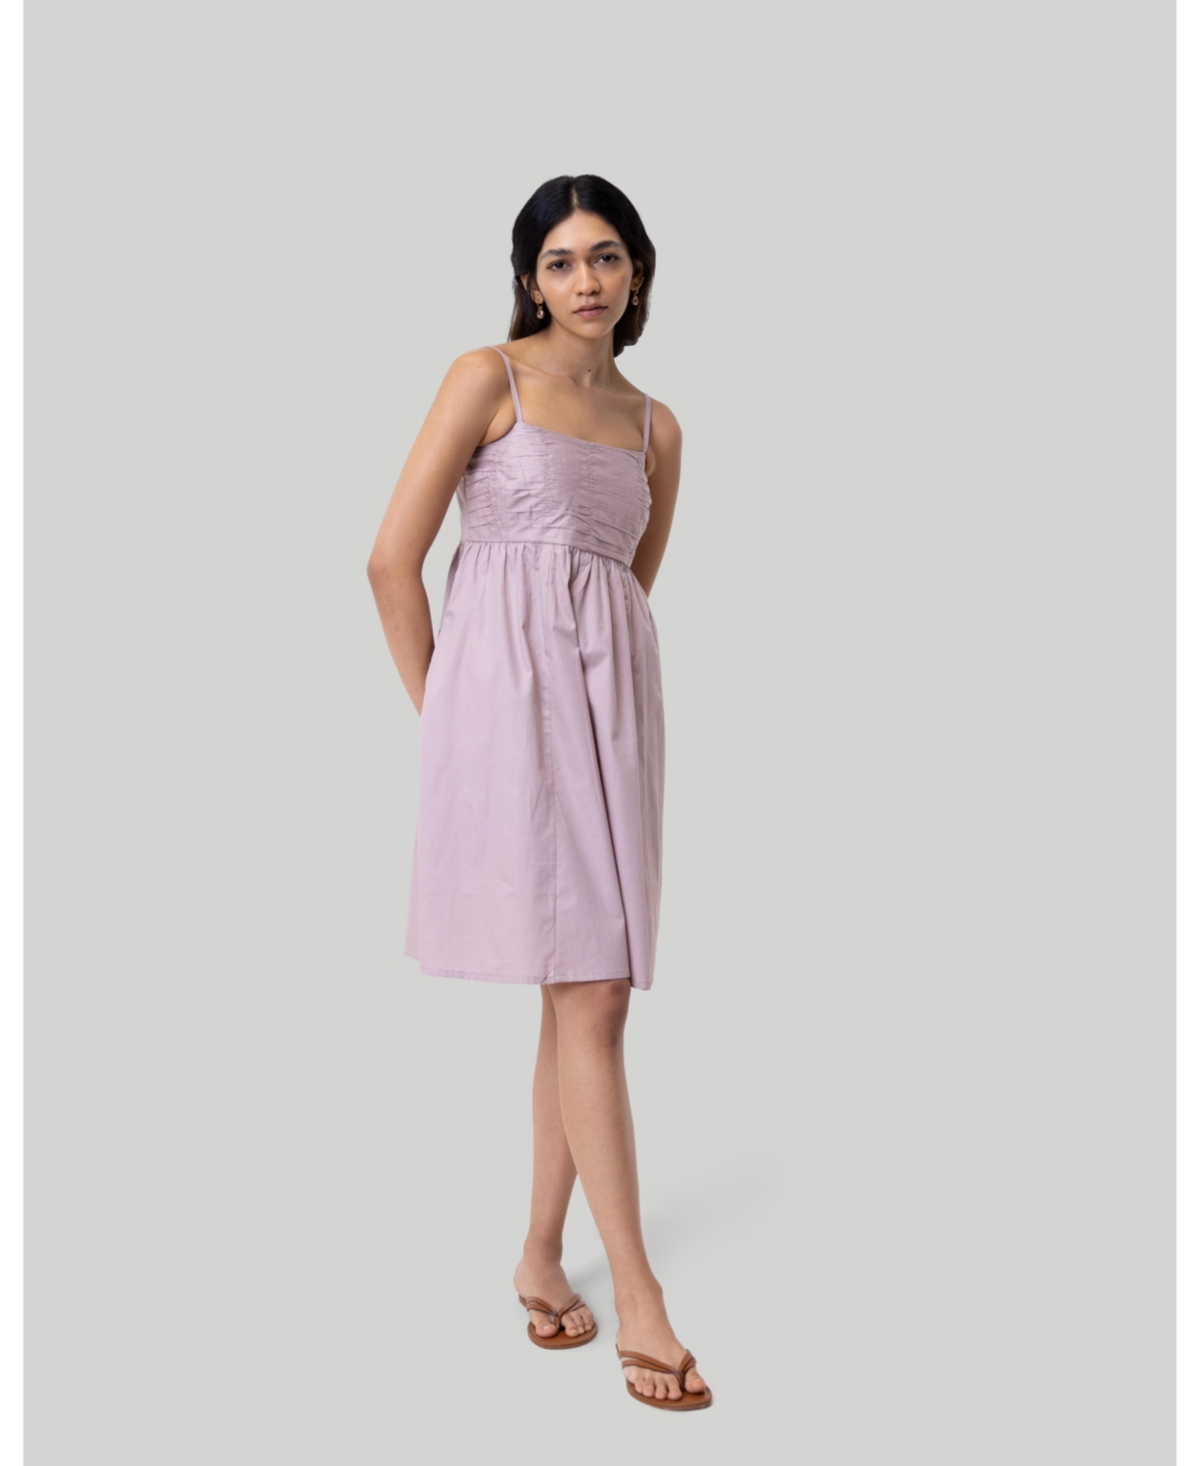 Women's Ruched Strappy Dress - Dusty pink